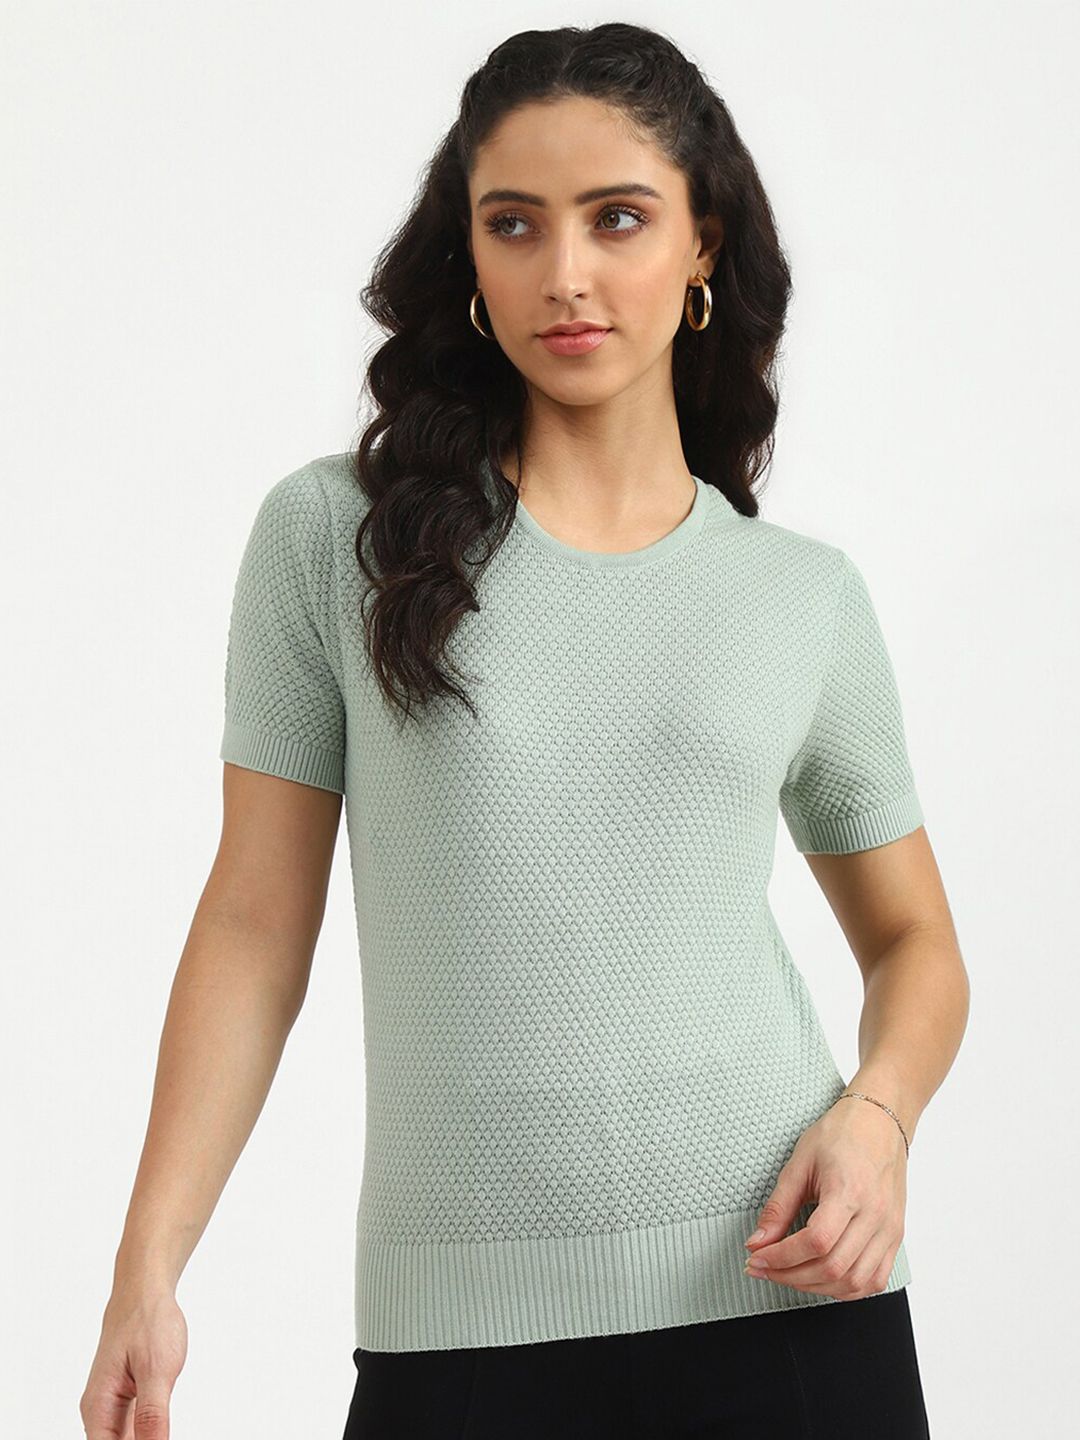 United Colors of Benetton Green Self Design Pure Cotton Fitted Top Price in India